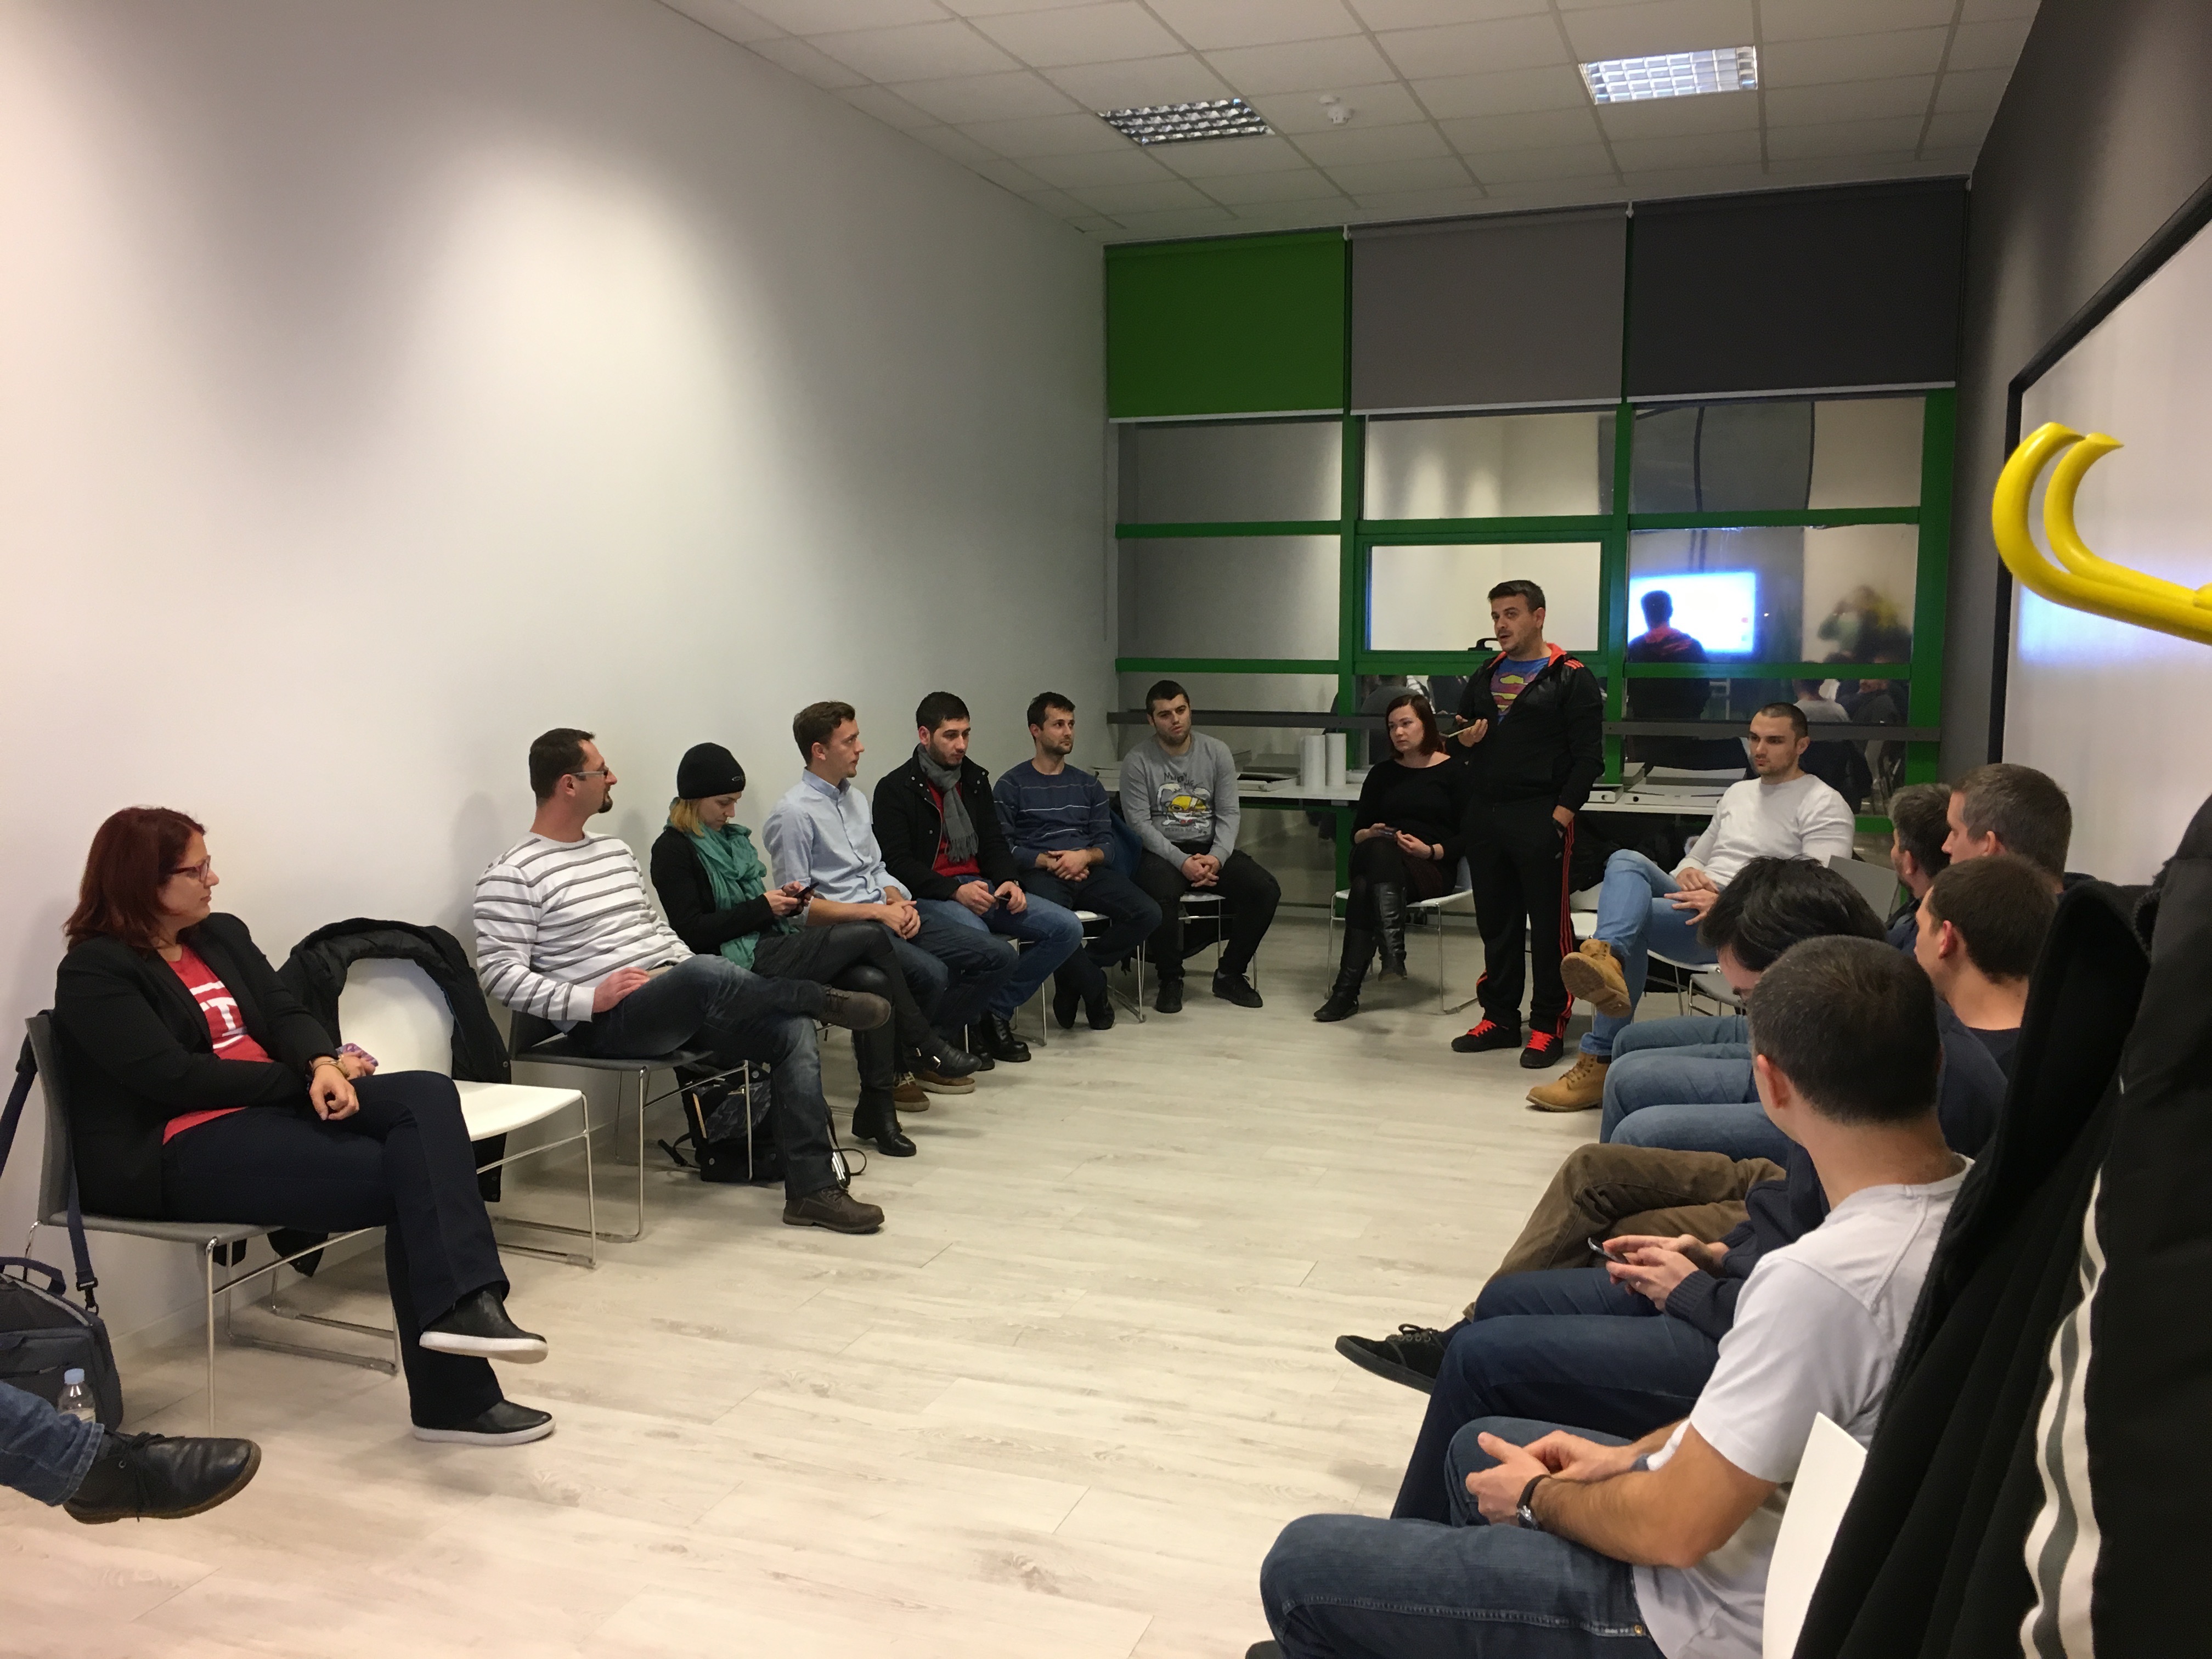 Report on Testival #26 meetup